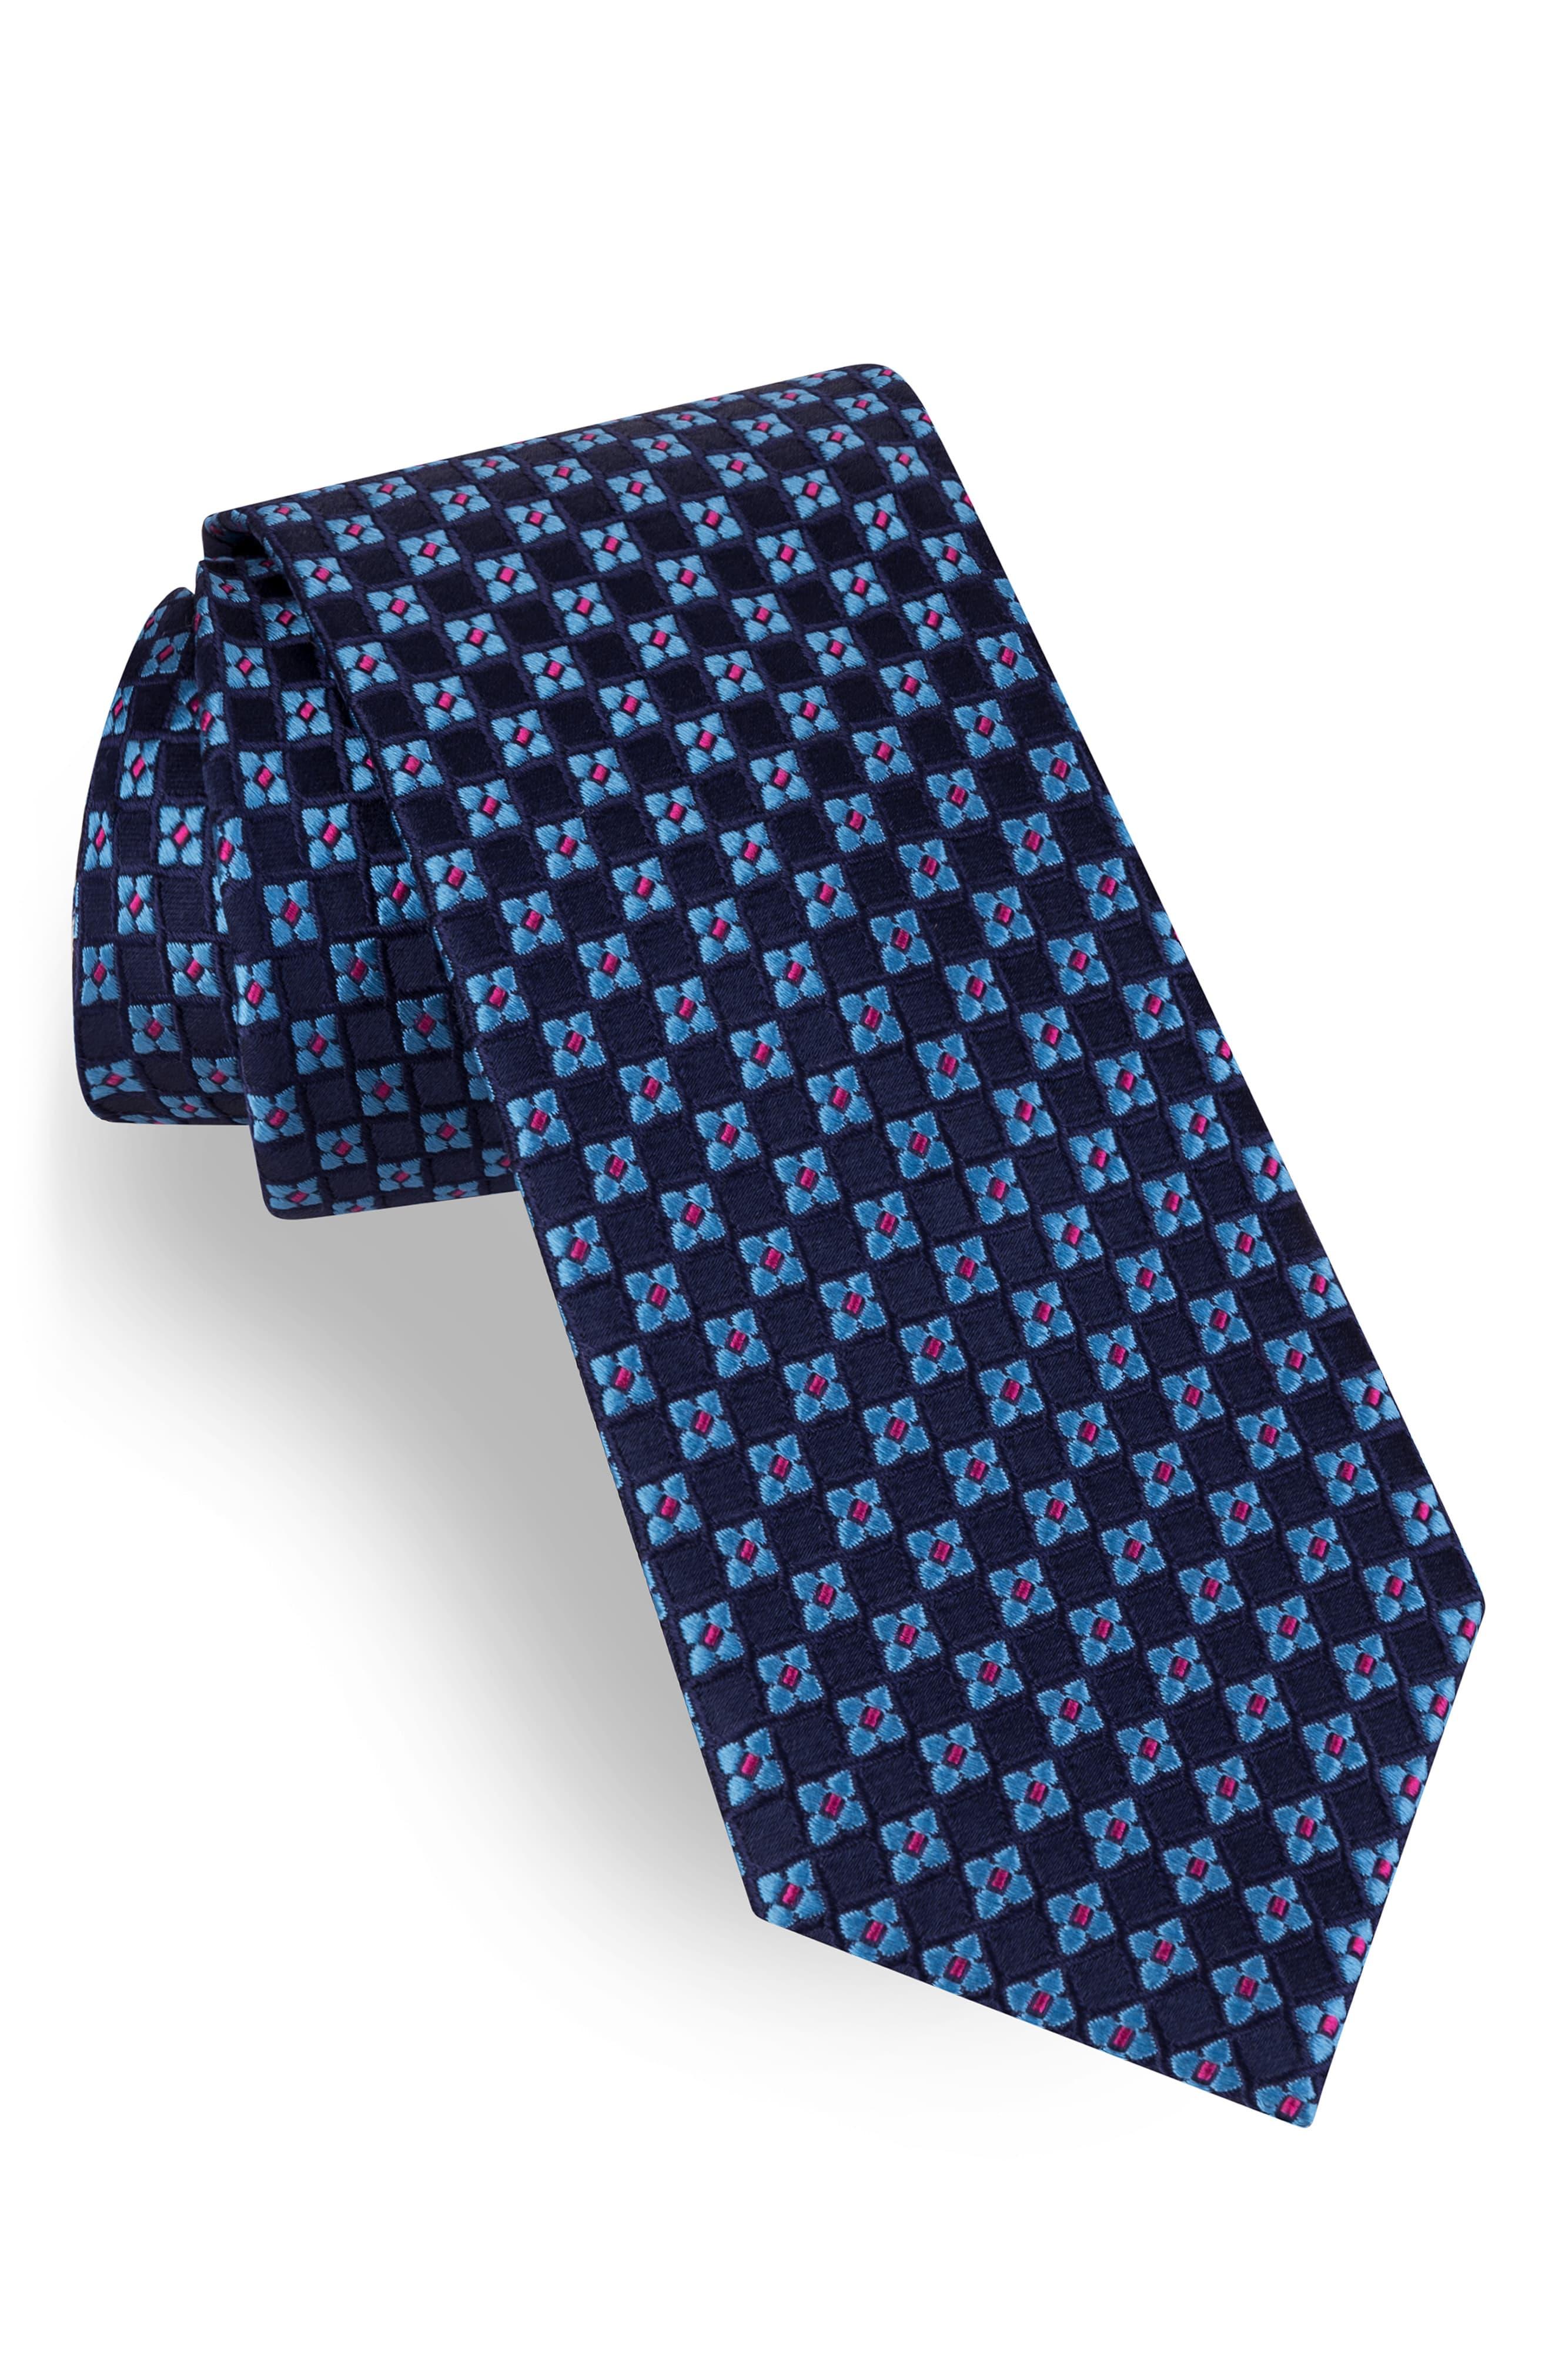 Ted Baker Floral Silk Tie in Blue for Men - Lyst